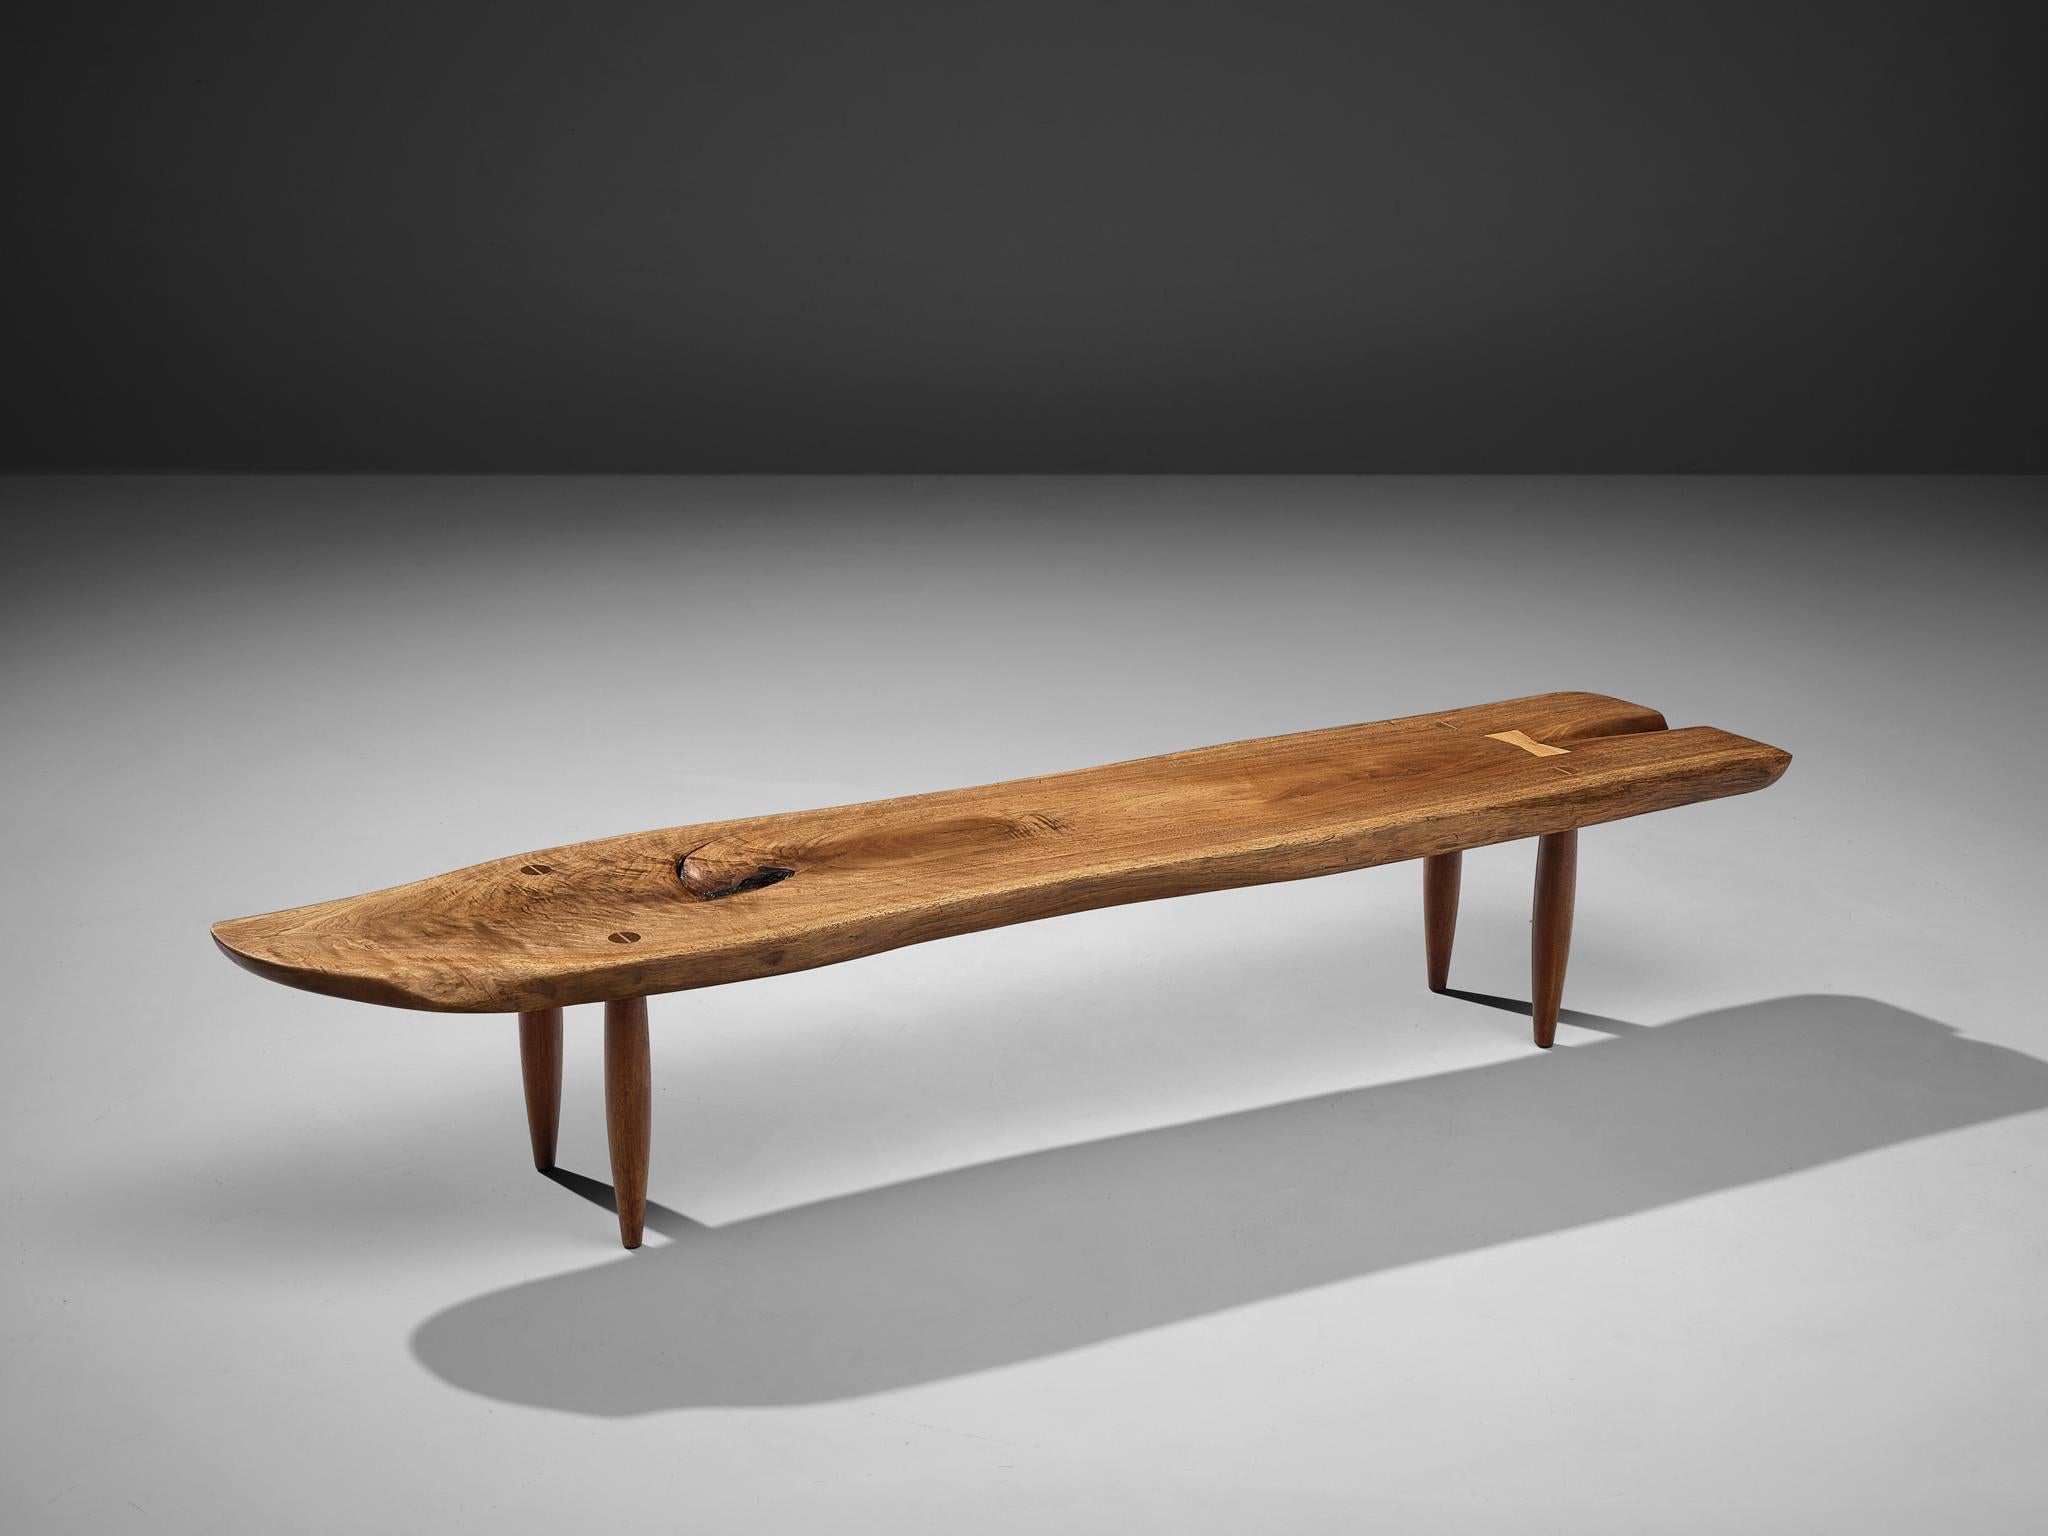 Phillip Lloyd Powell, coffee table, walnut, United States, 1960s

Stunning coffee table with free edges by US designer Phillip Lloyd Powell. On four circular tapered legs Powell places a long tabletop that follows the characteristics of the natural